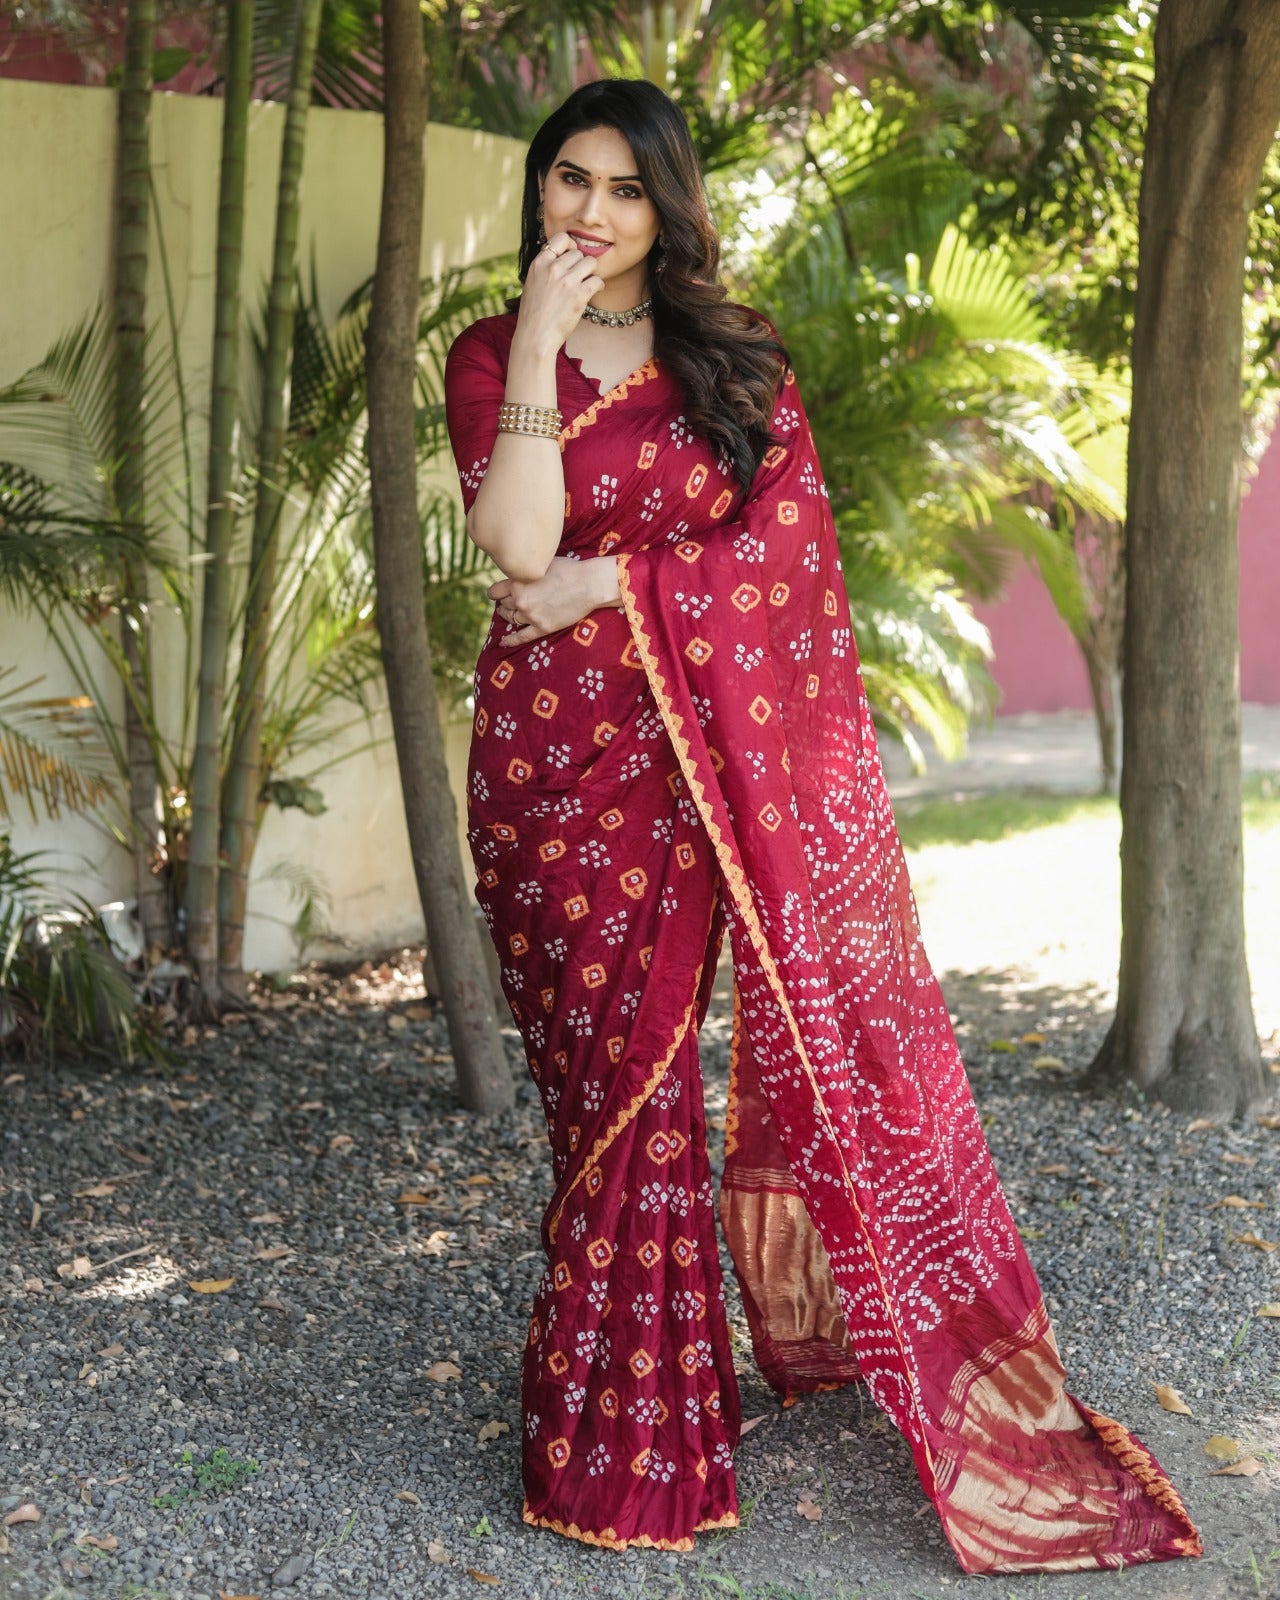 Premium and high quality, comfortable Bandhej silk drapes that is super stylish and pretty